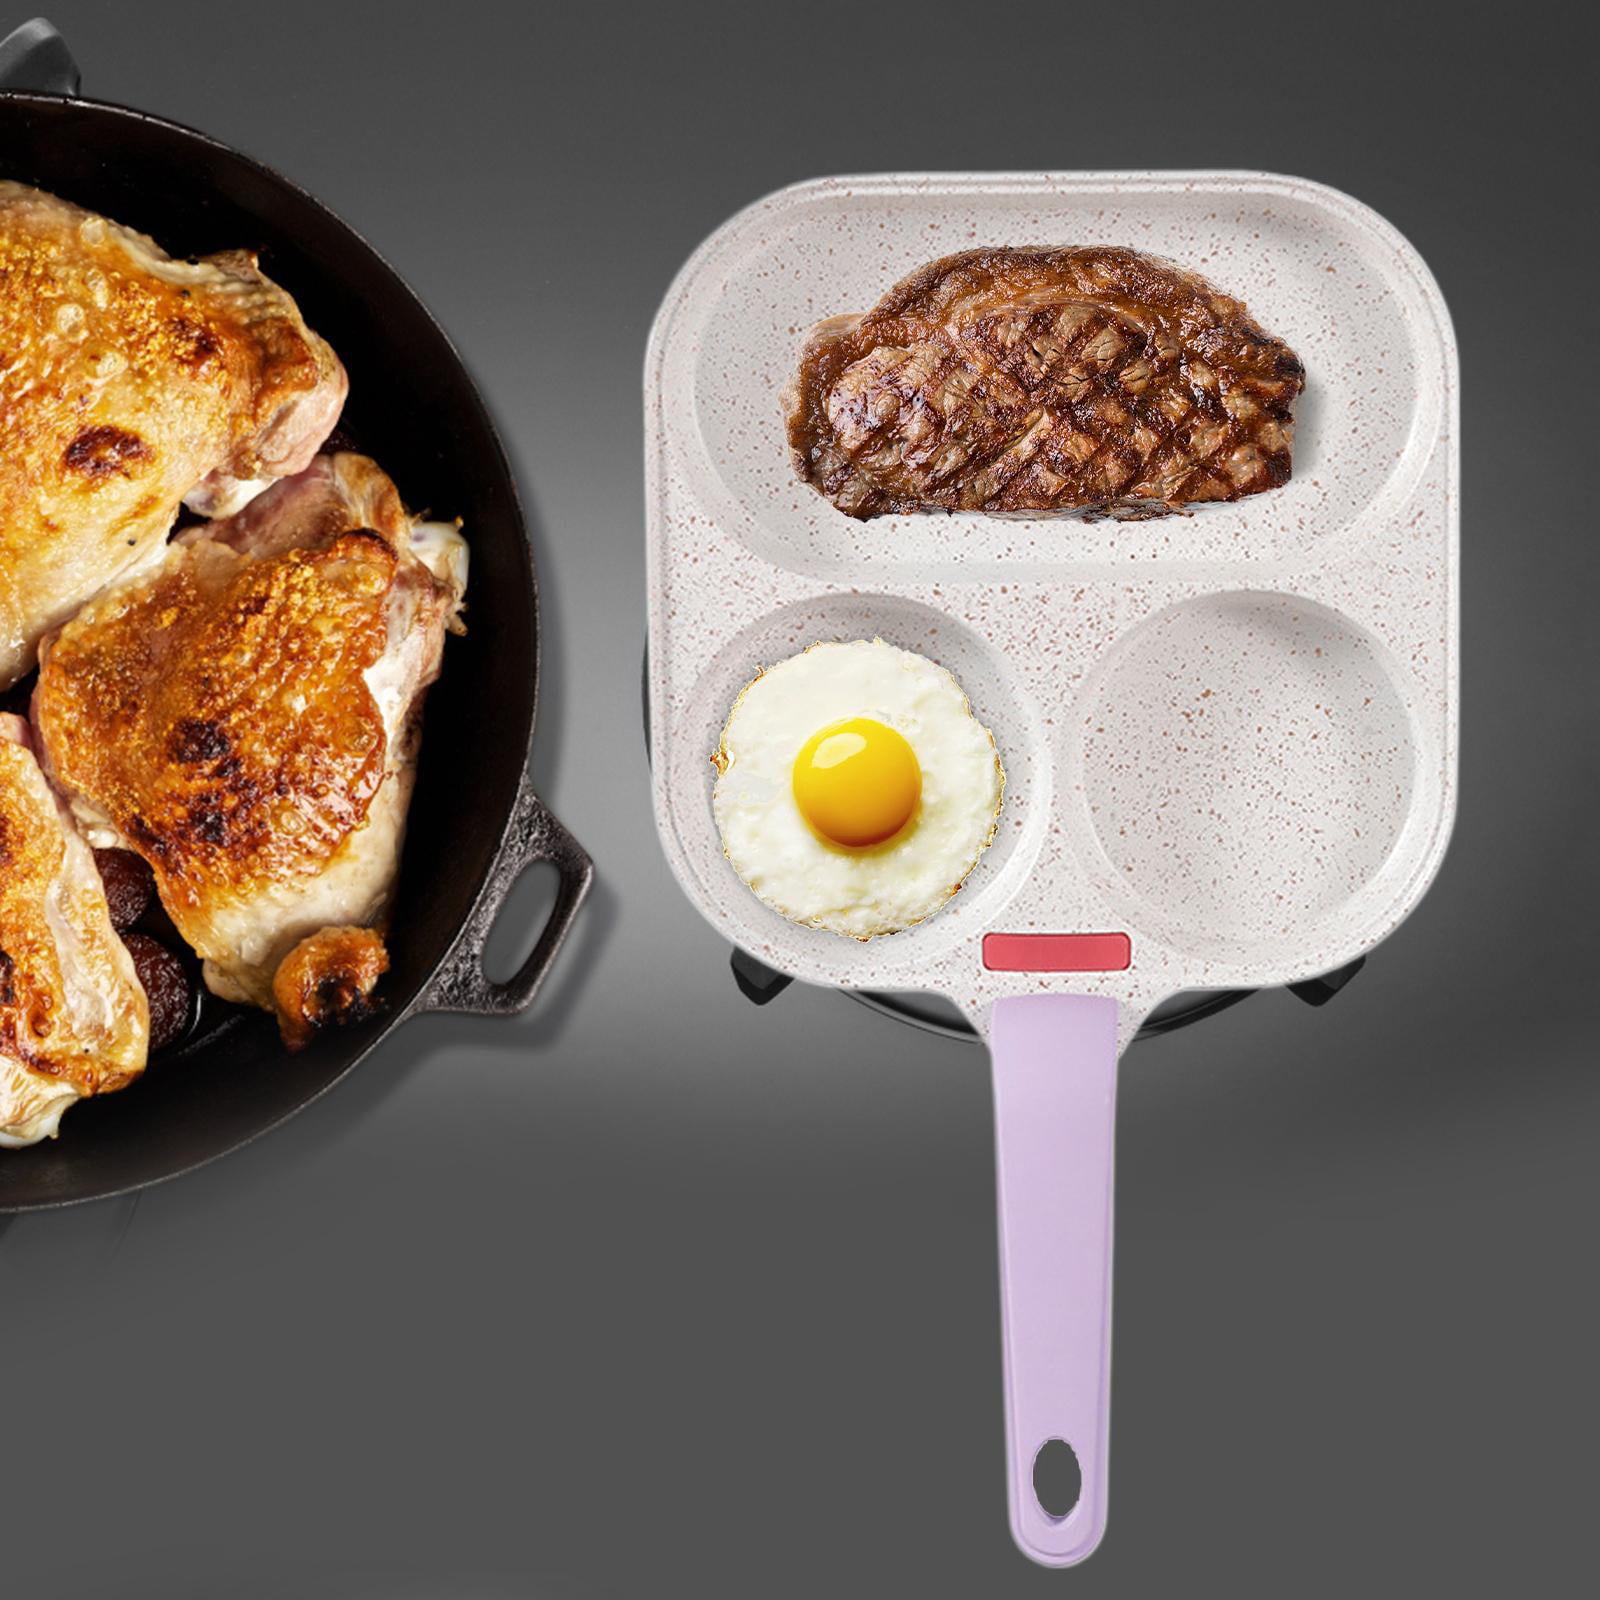  universal Nonstick Pan 7 Inches / 18 cm Diameter, Frying Pan  With Lid For Bacon, Pancakes, and Steaks, Egg Pan with Ergonomic Handle:  Home & Kitchen